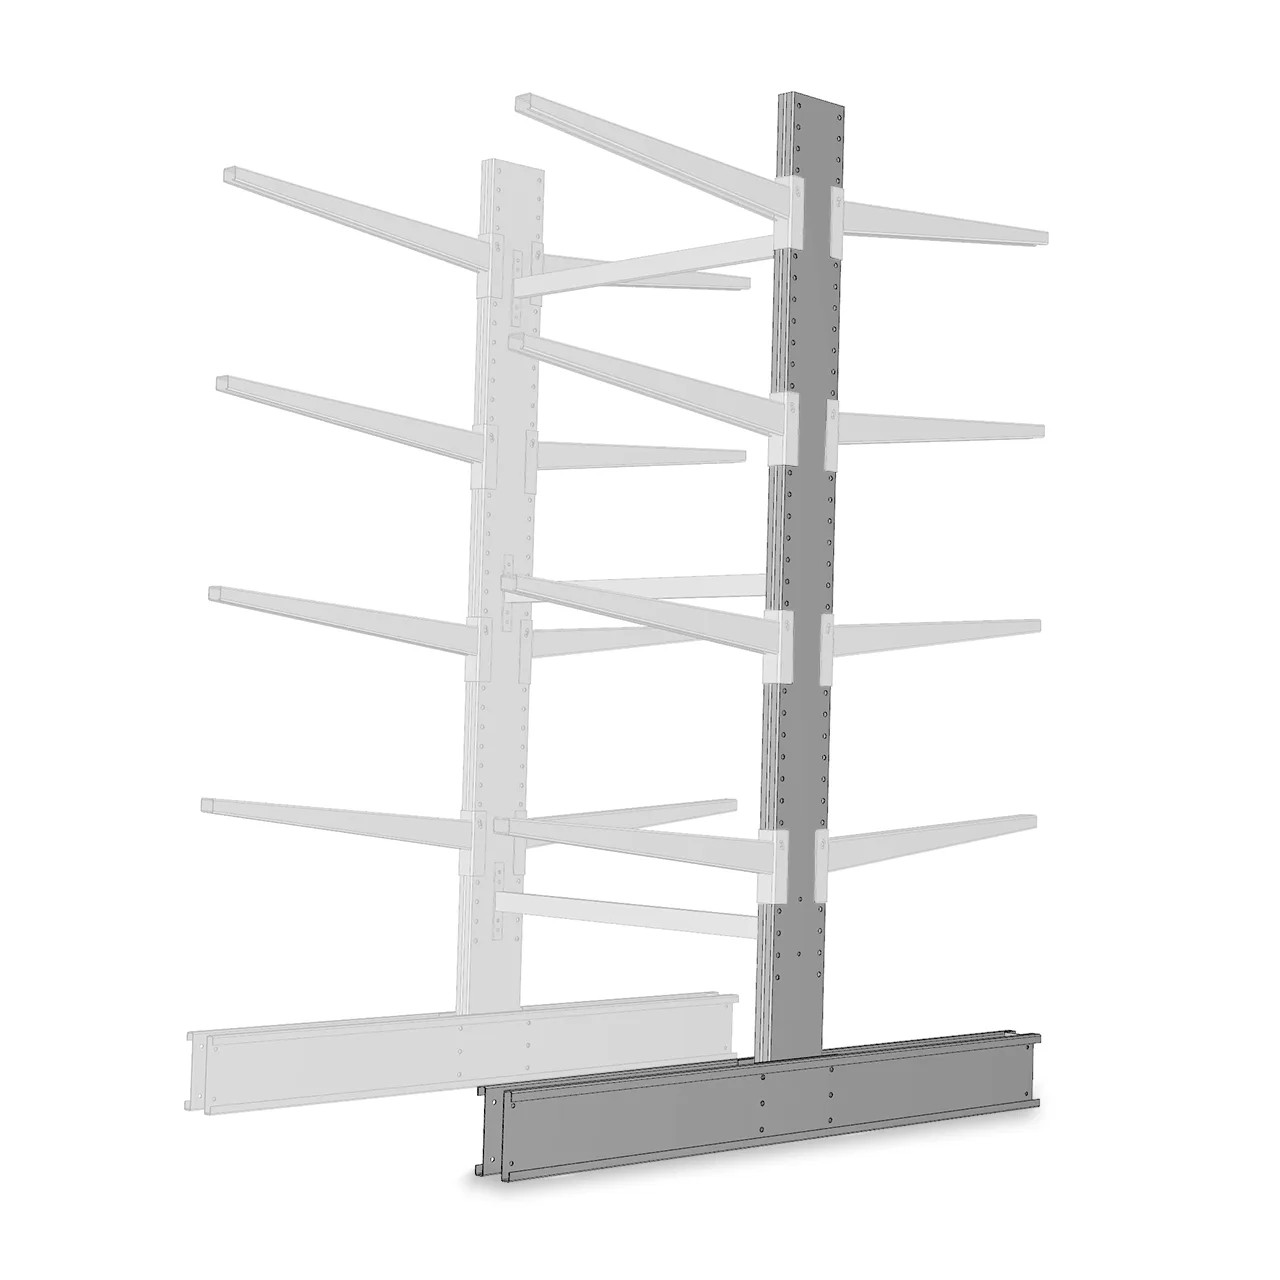 Cantilever racking upright and base